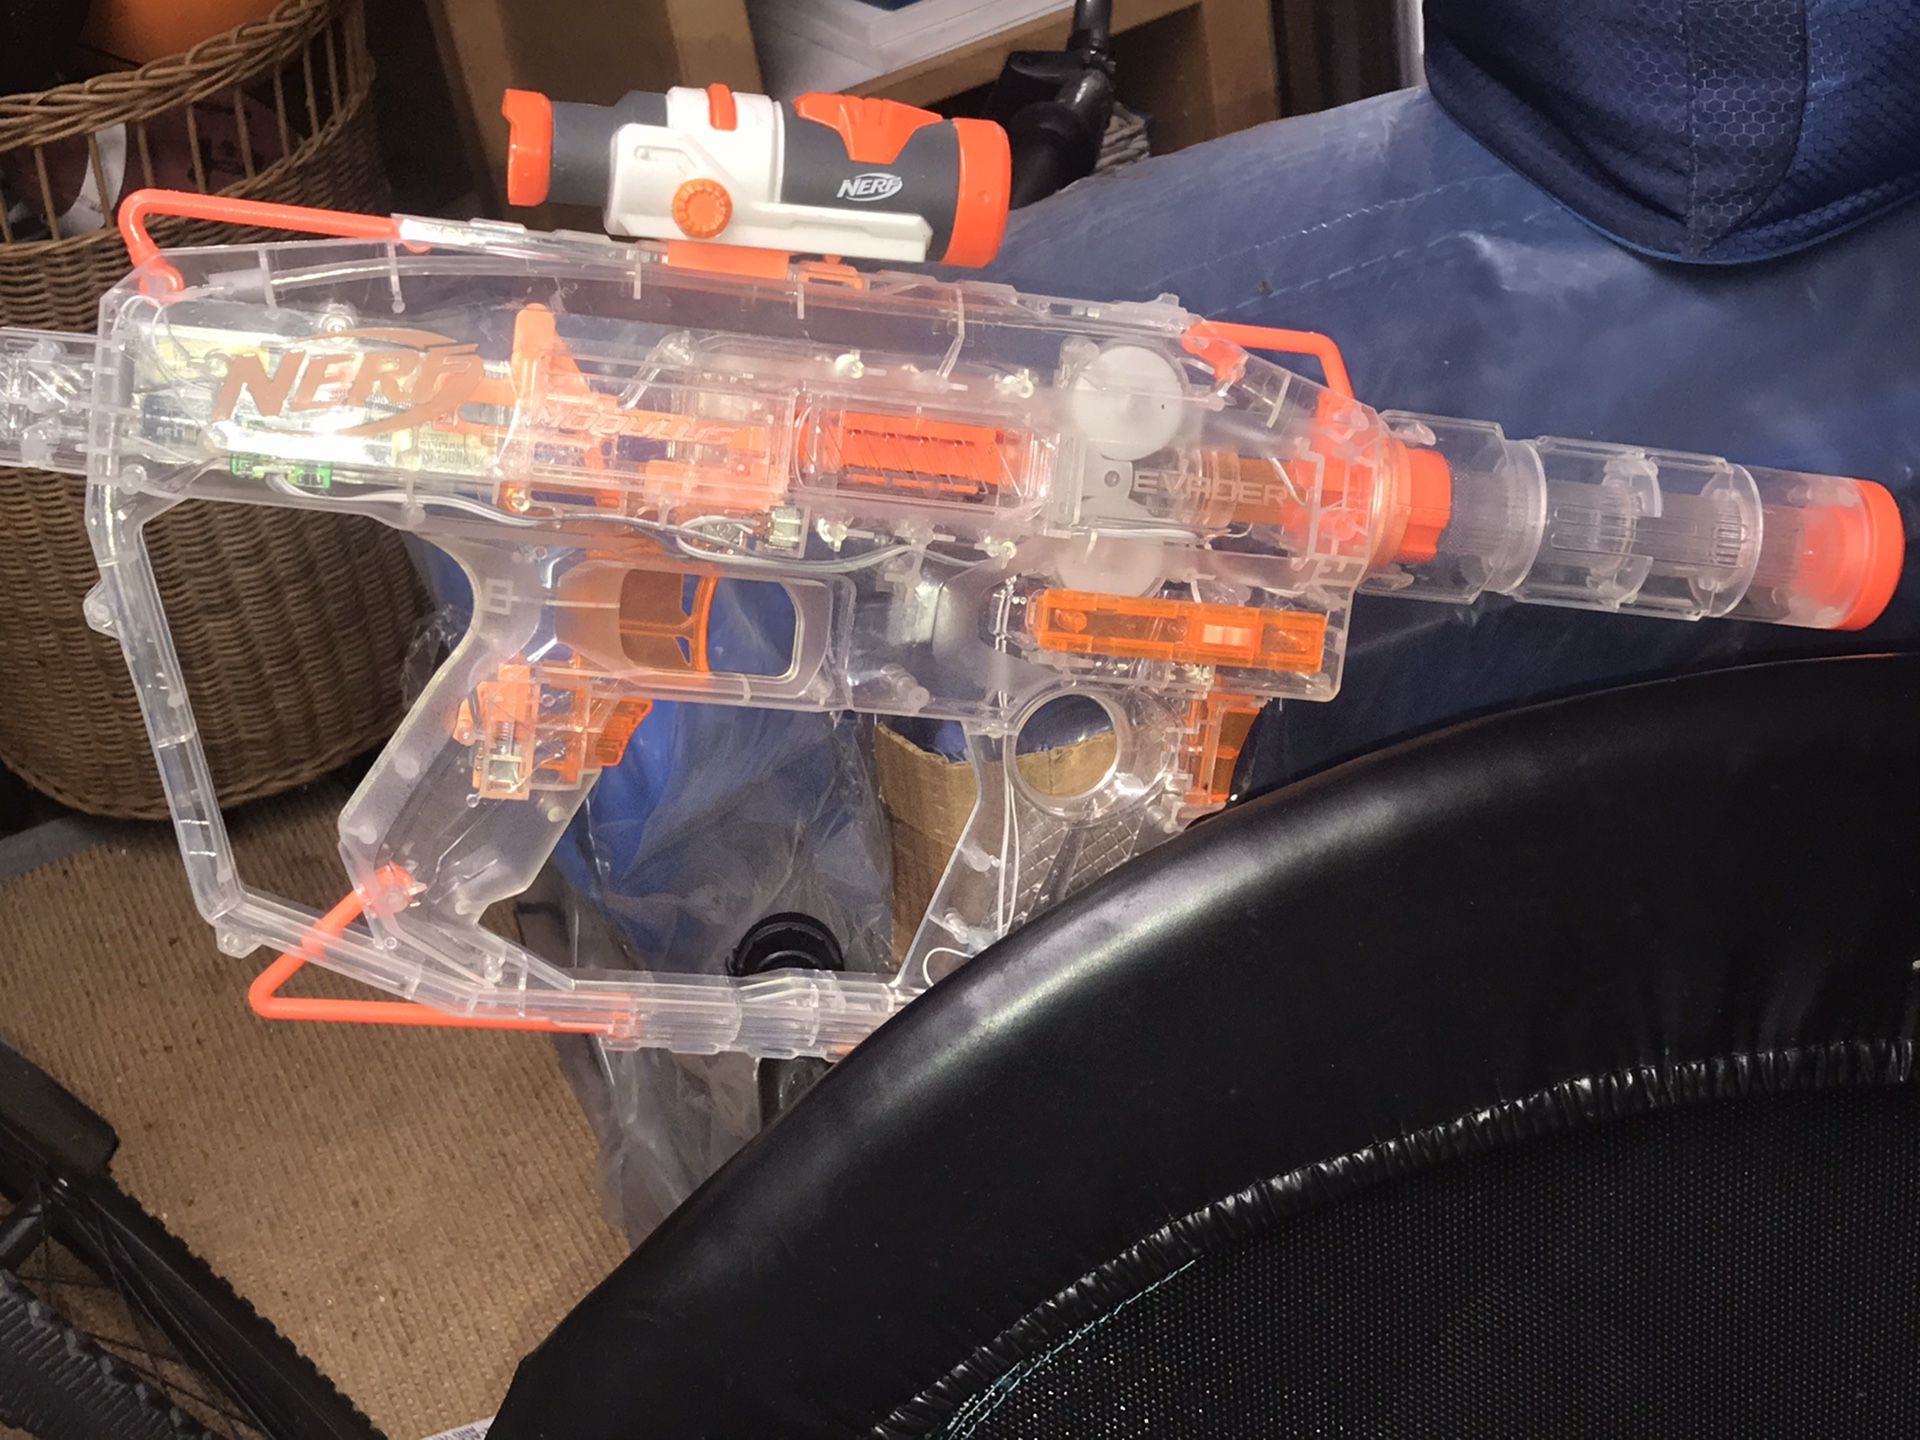 Preowned Evader Nerf Gun With mag and scope great shape!